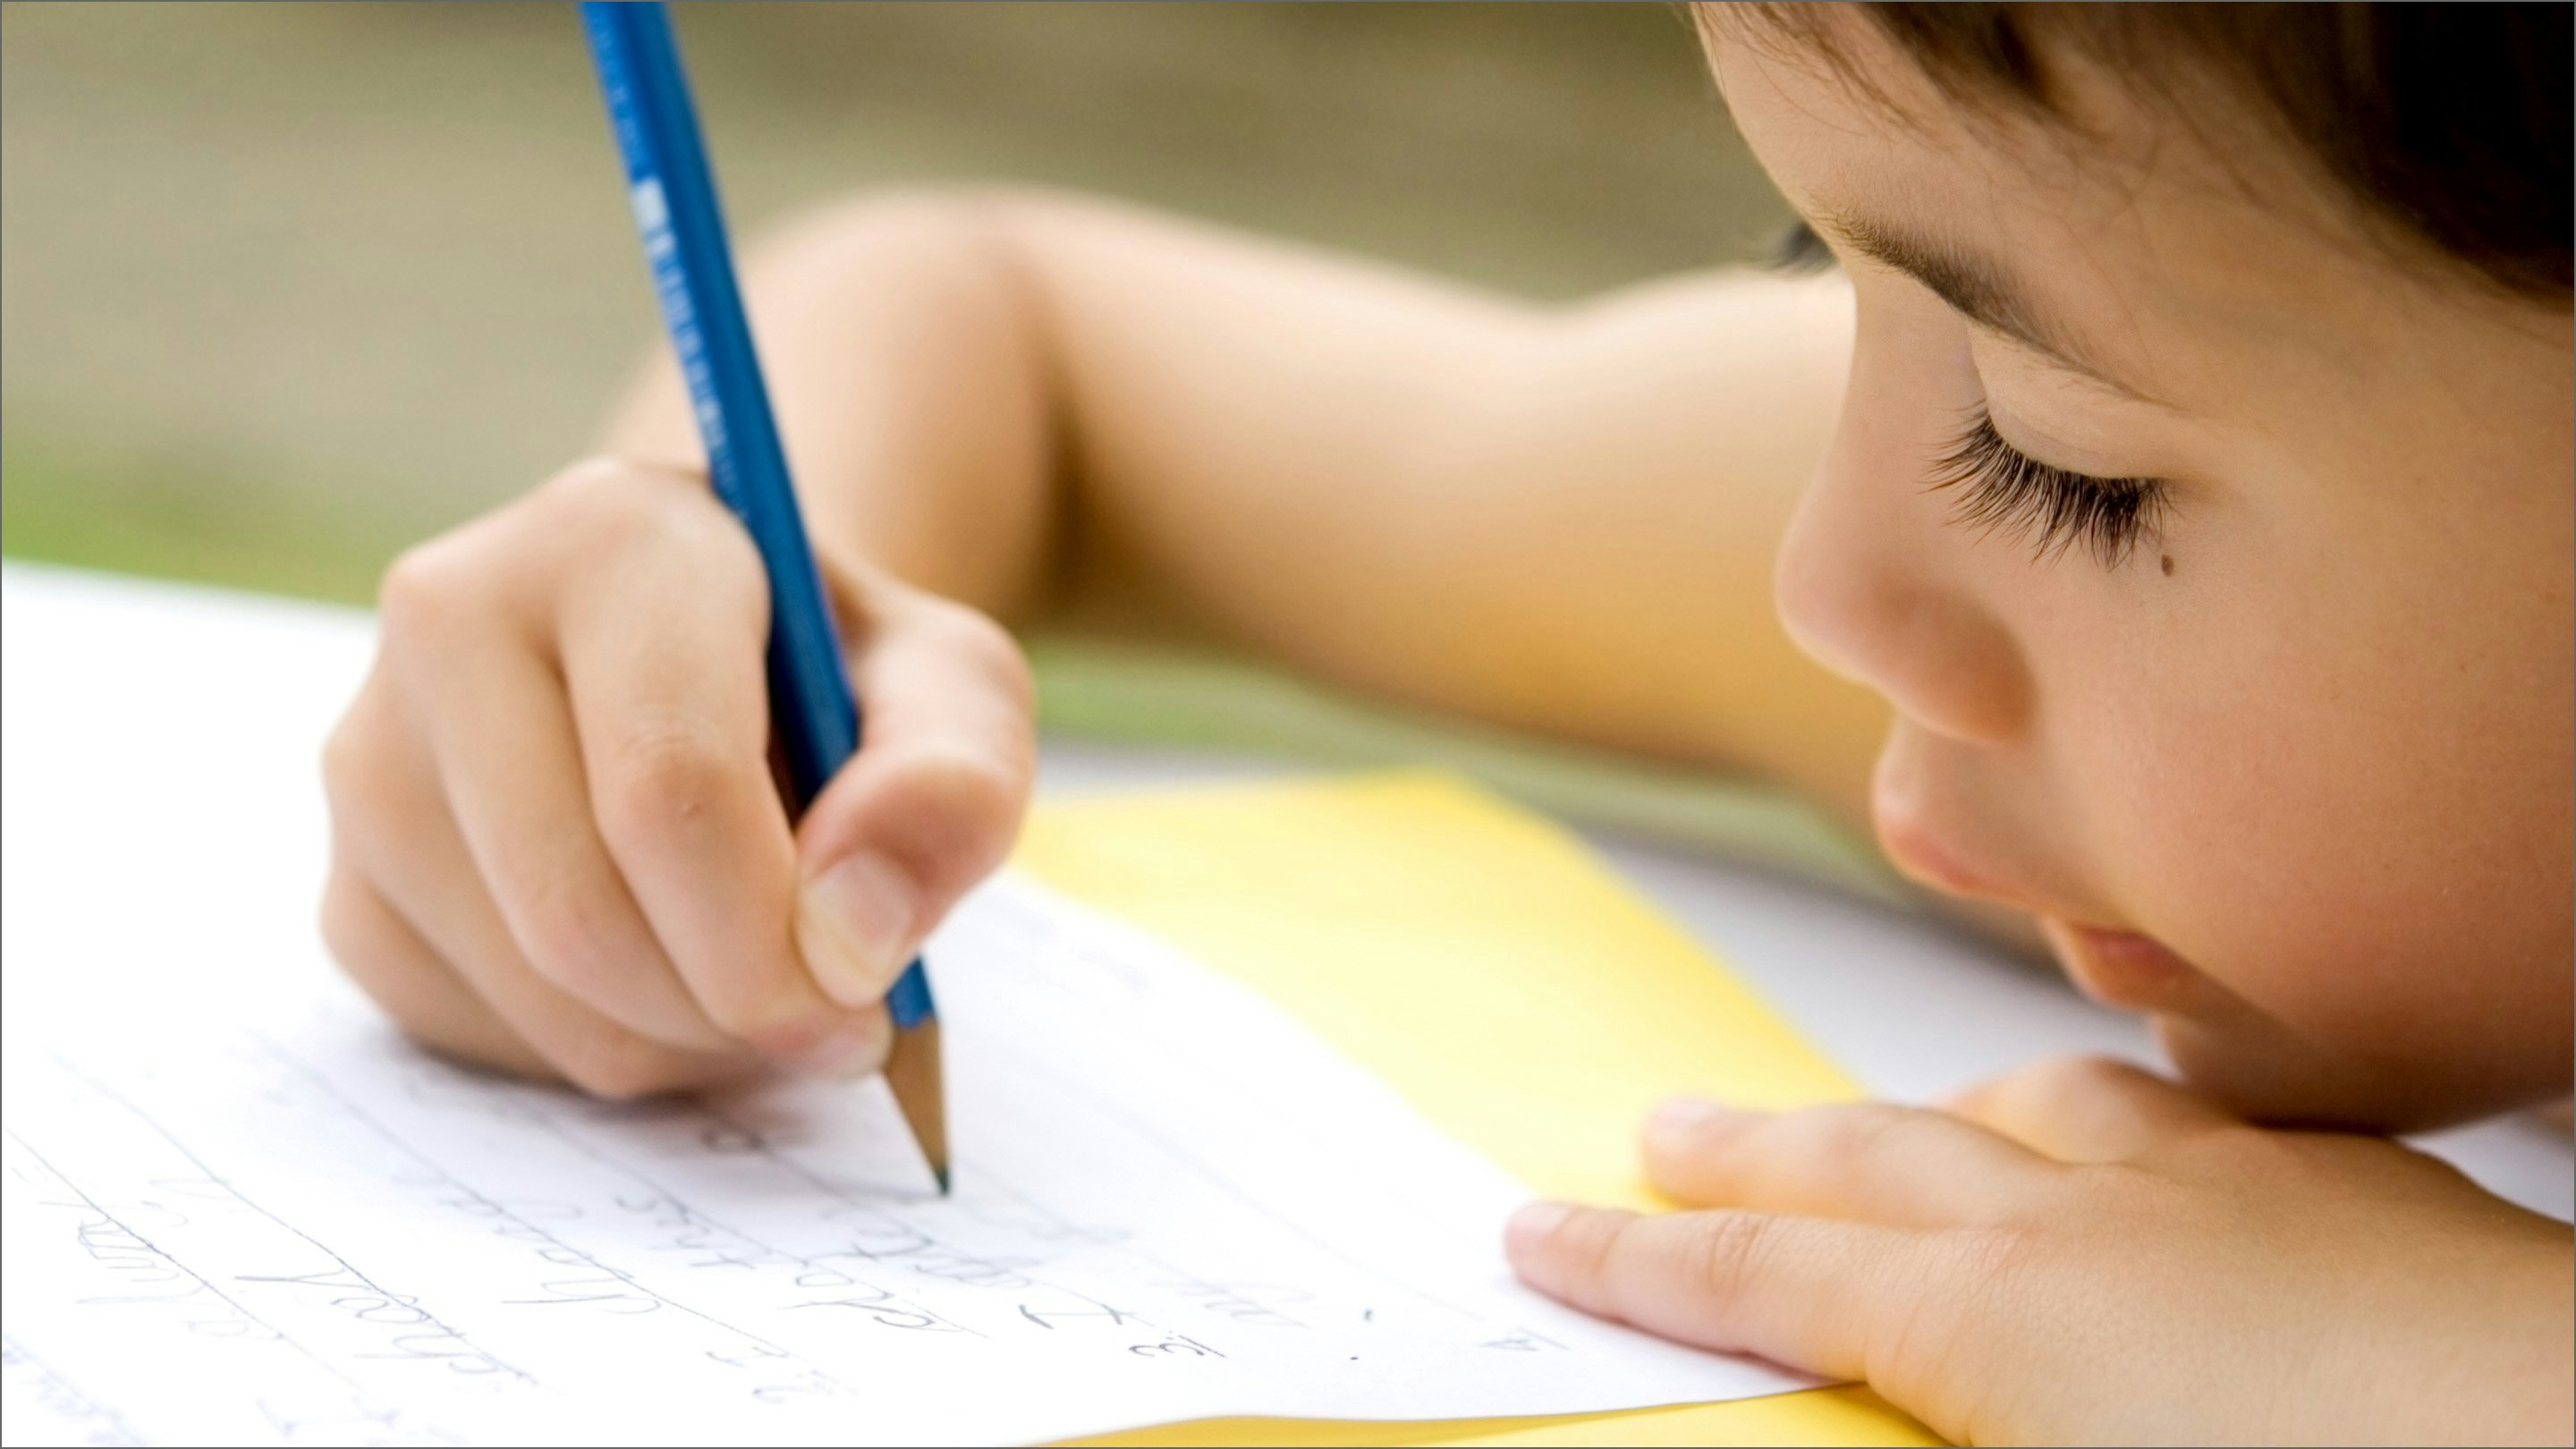 How to Identify & Work with Dysgraphia